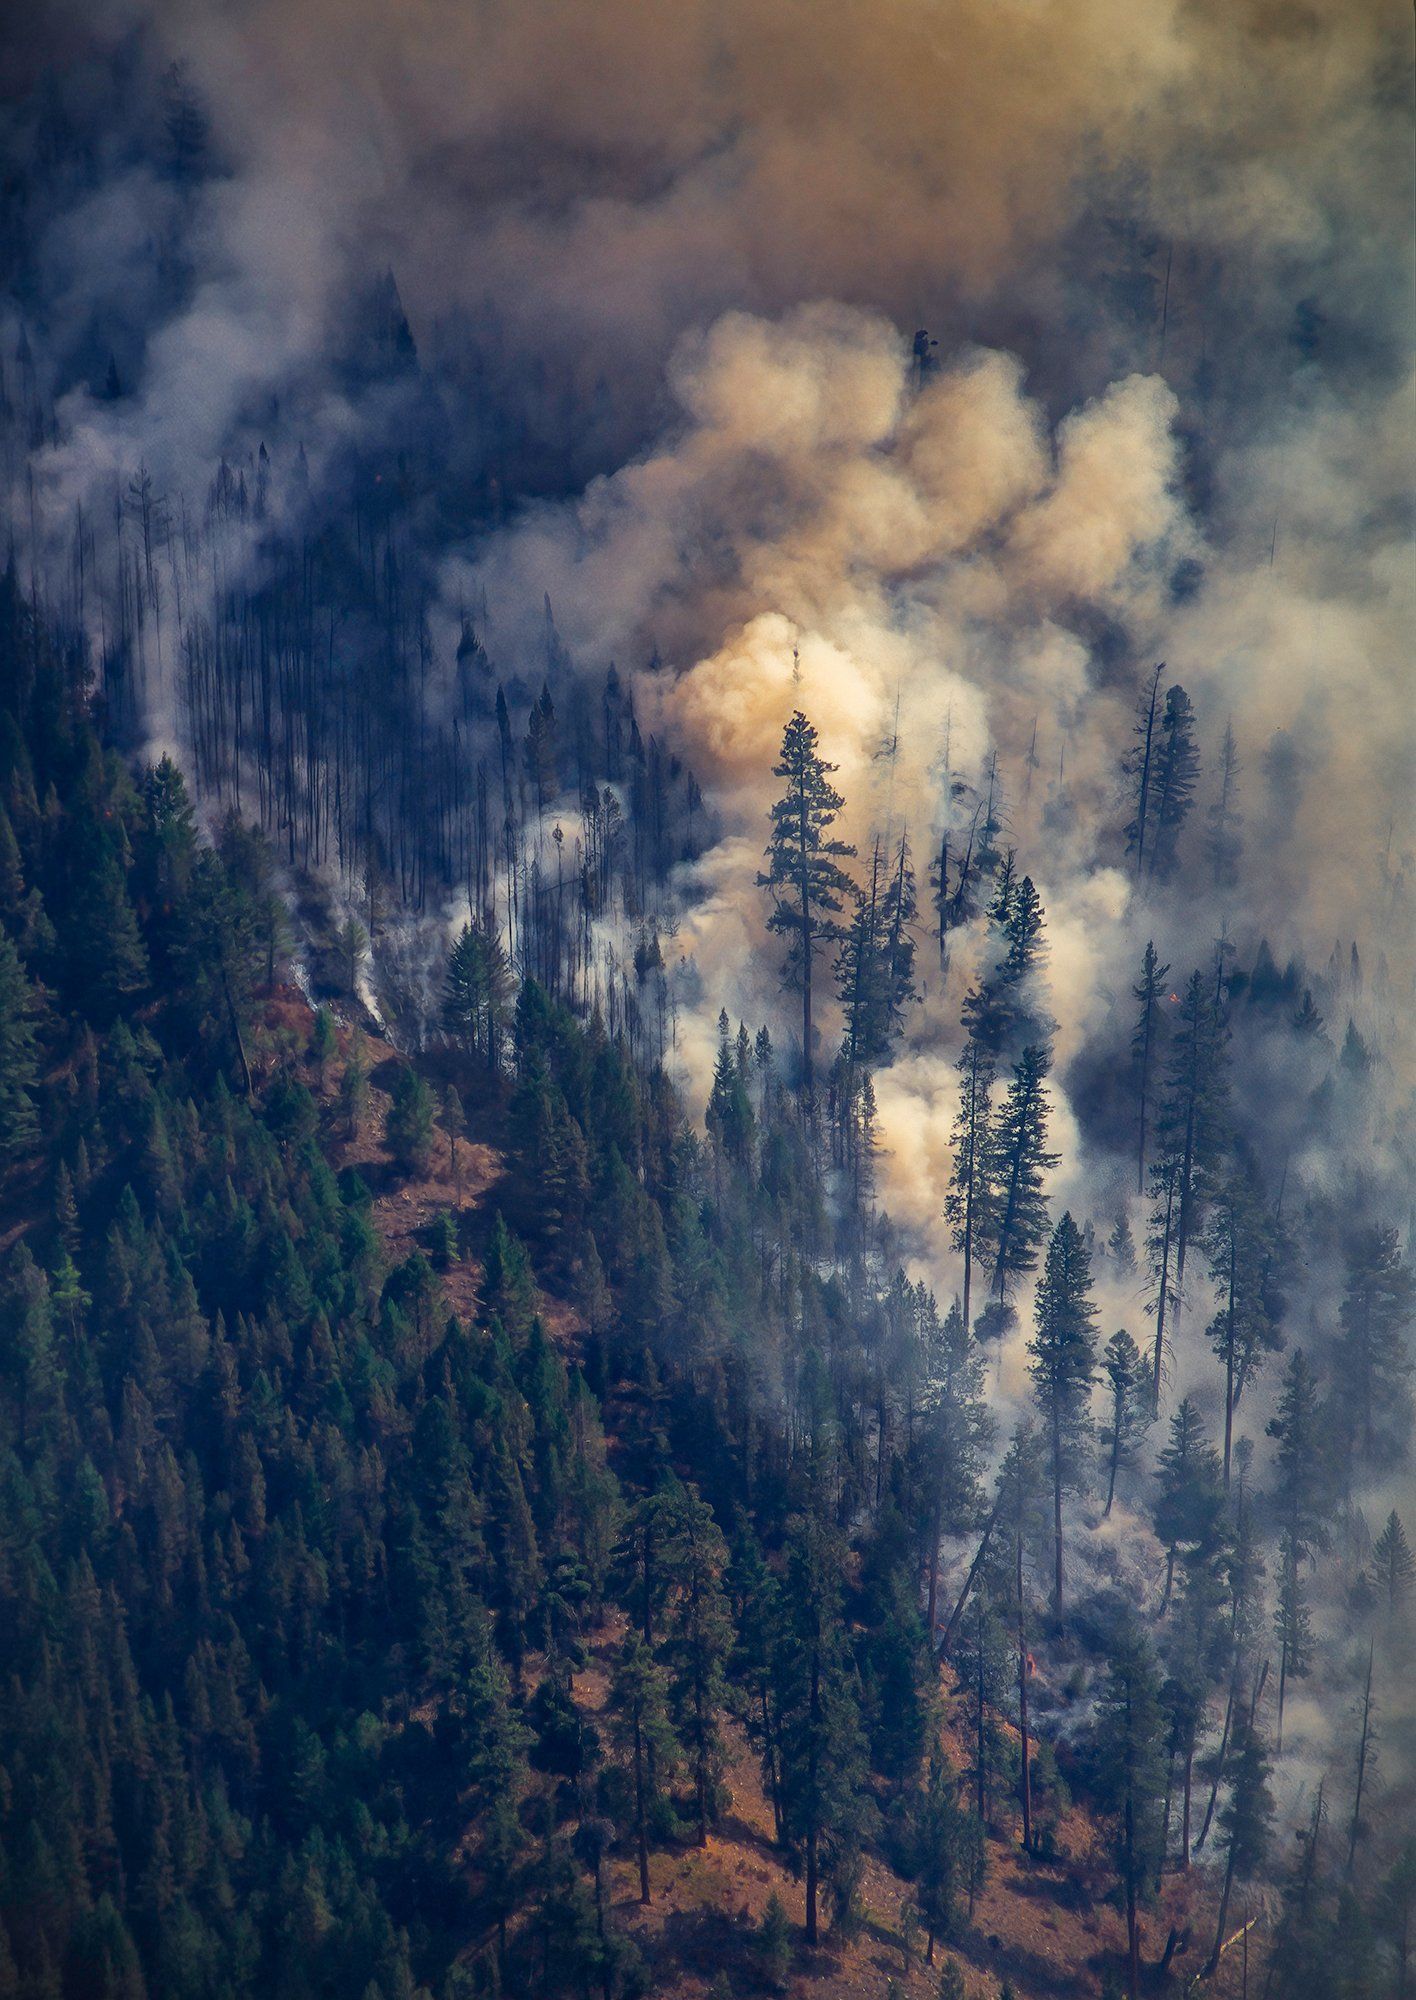 Smoke billows out of the Bitterroot National Forest, Montana.